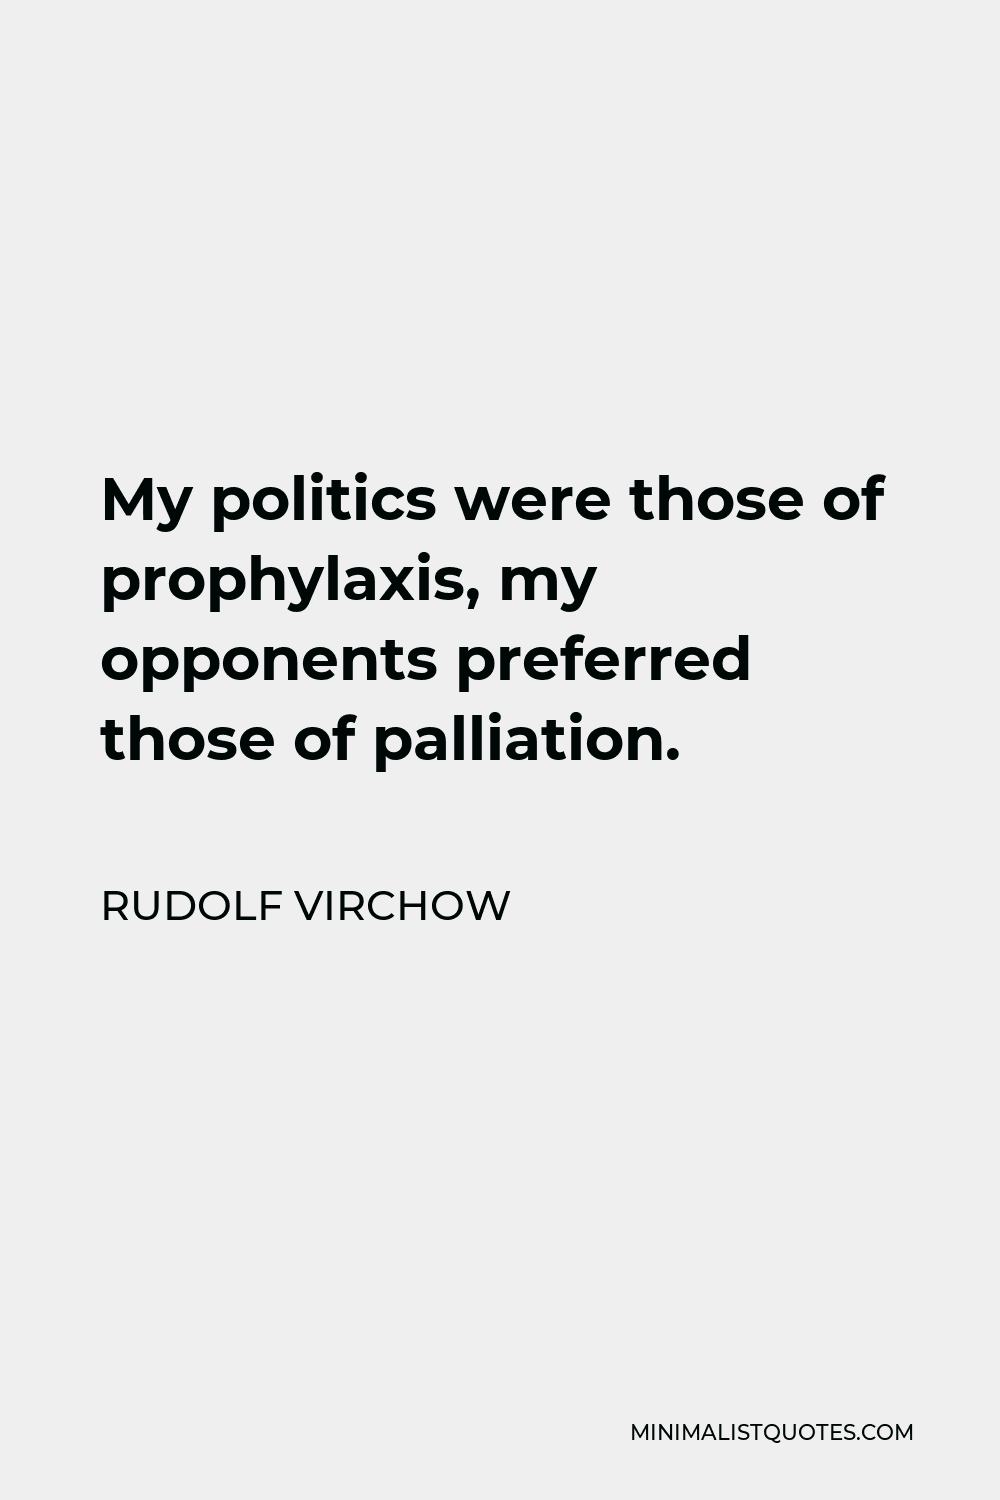 Rudolf Virchow Quote - My politics were those of prophylaxis, my opponents preferred those of palliation.